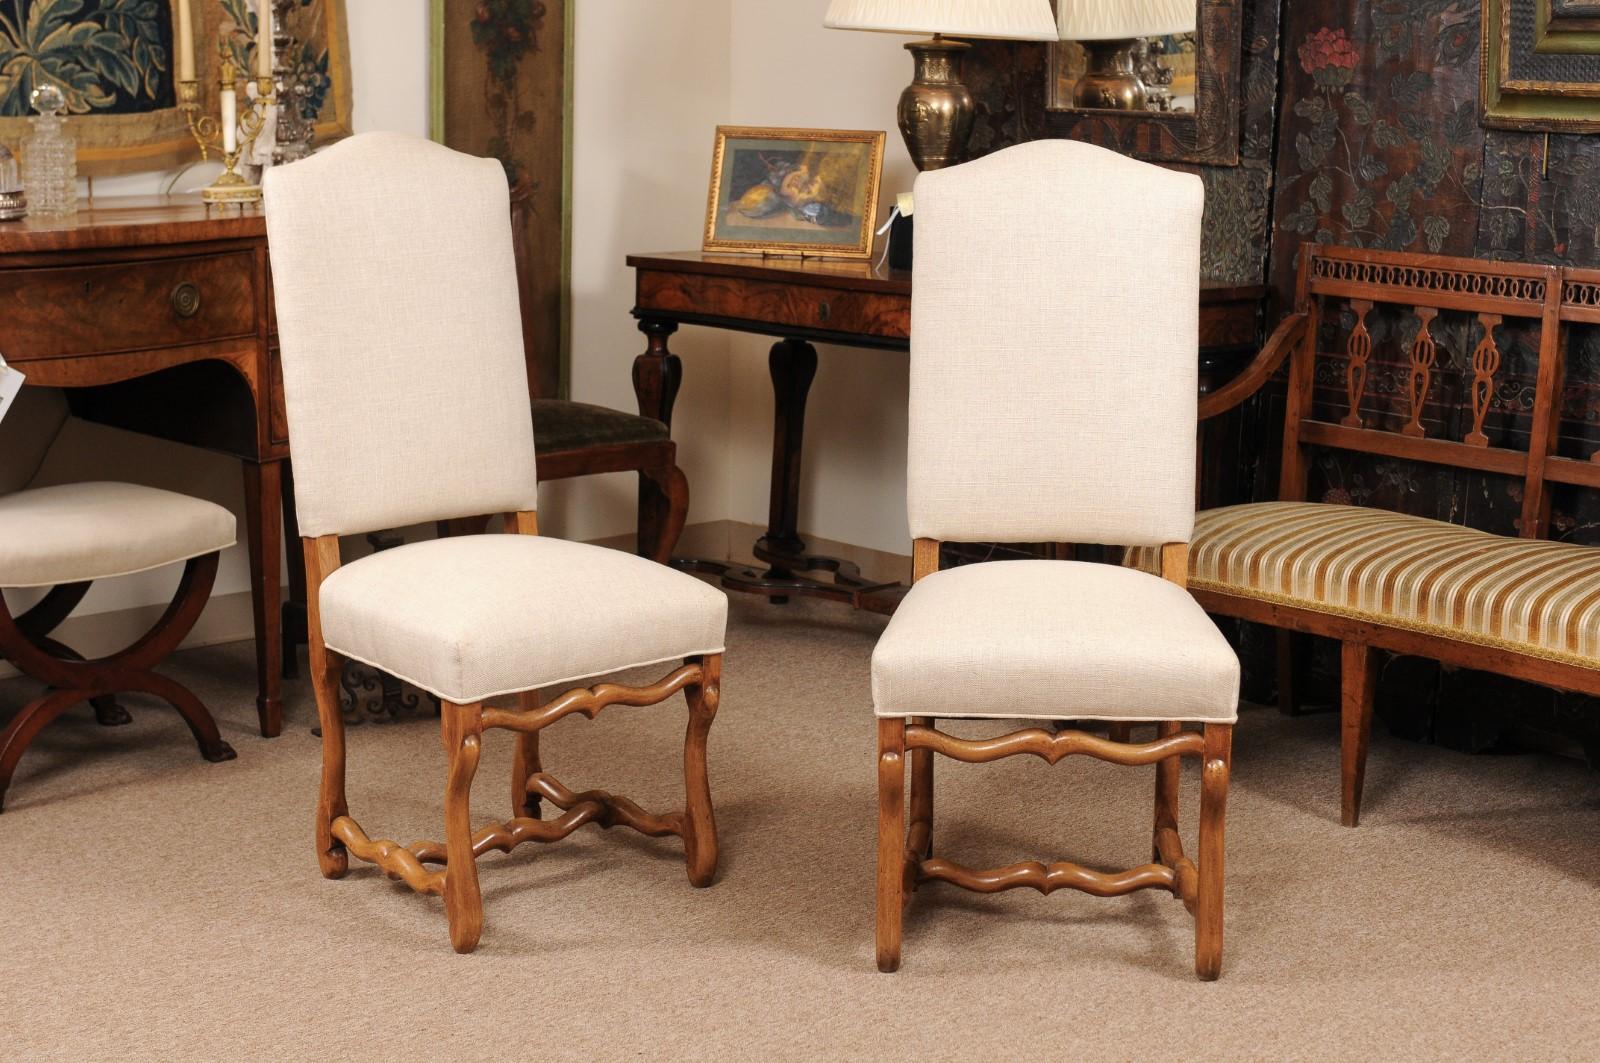 The set of 8 French Louis XIV style dining chairs in beechwood with high arched backs, linen upholstery, button bone legs and stretcher.